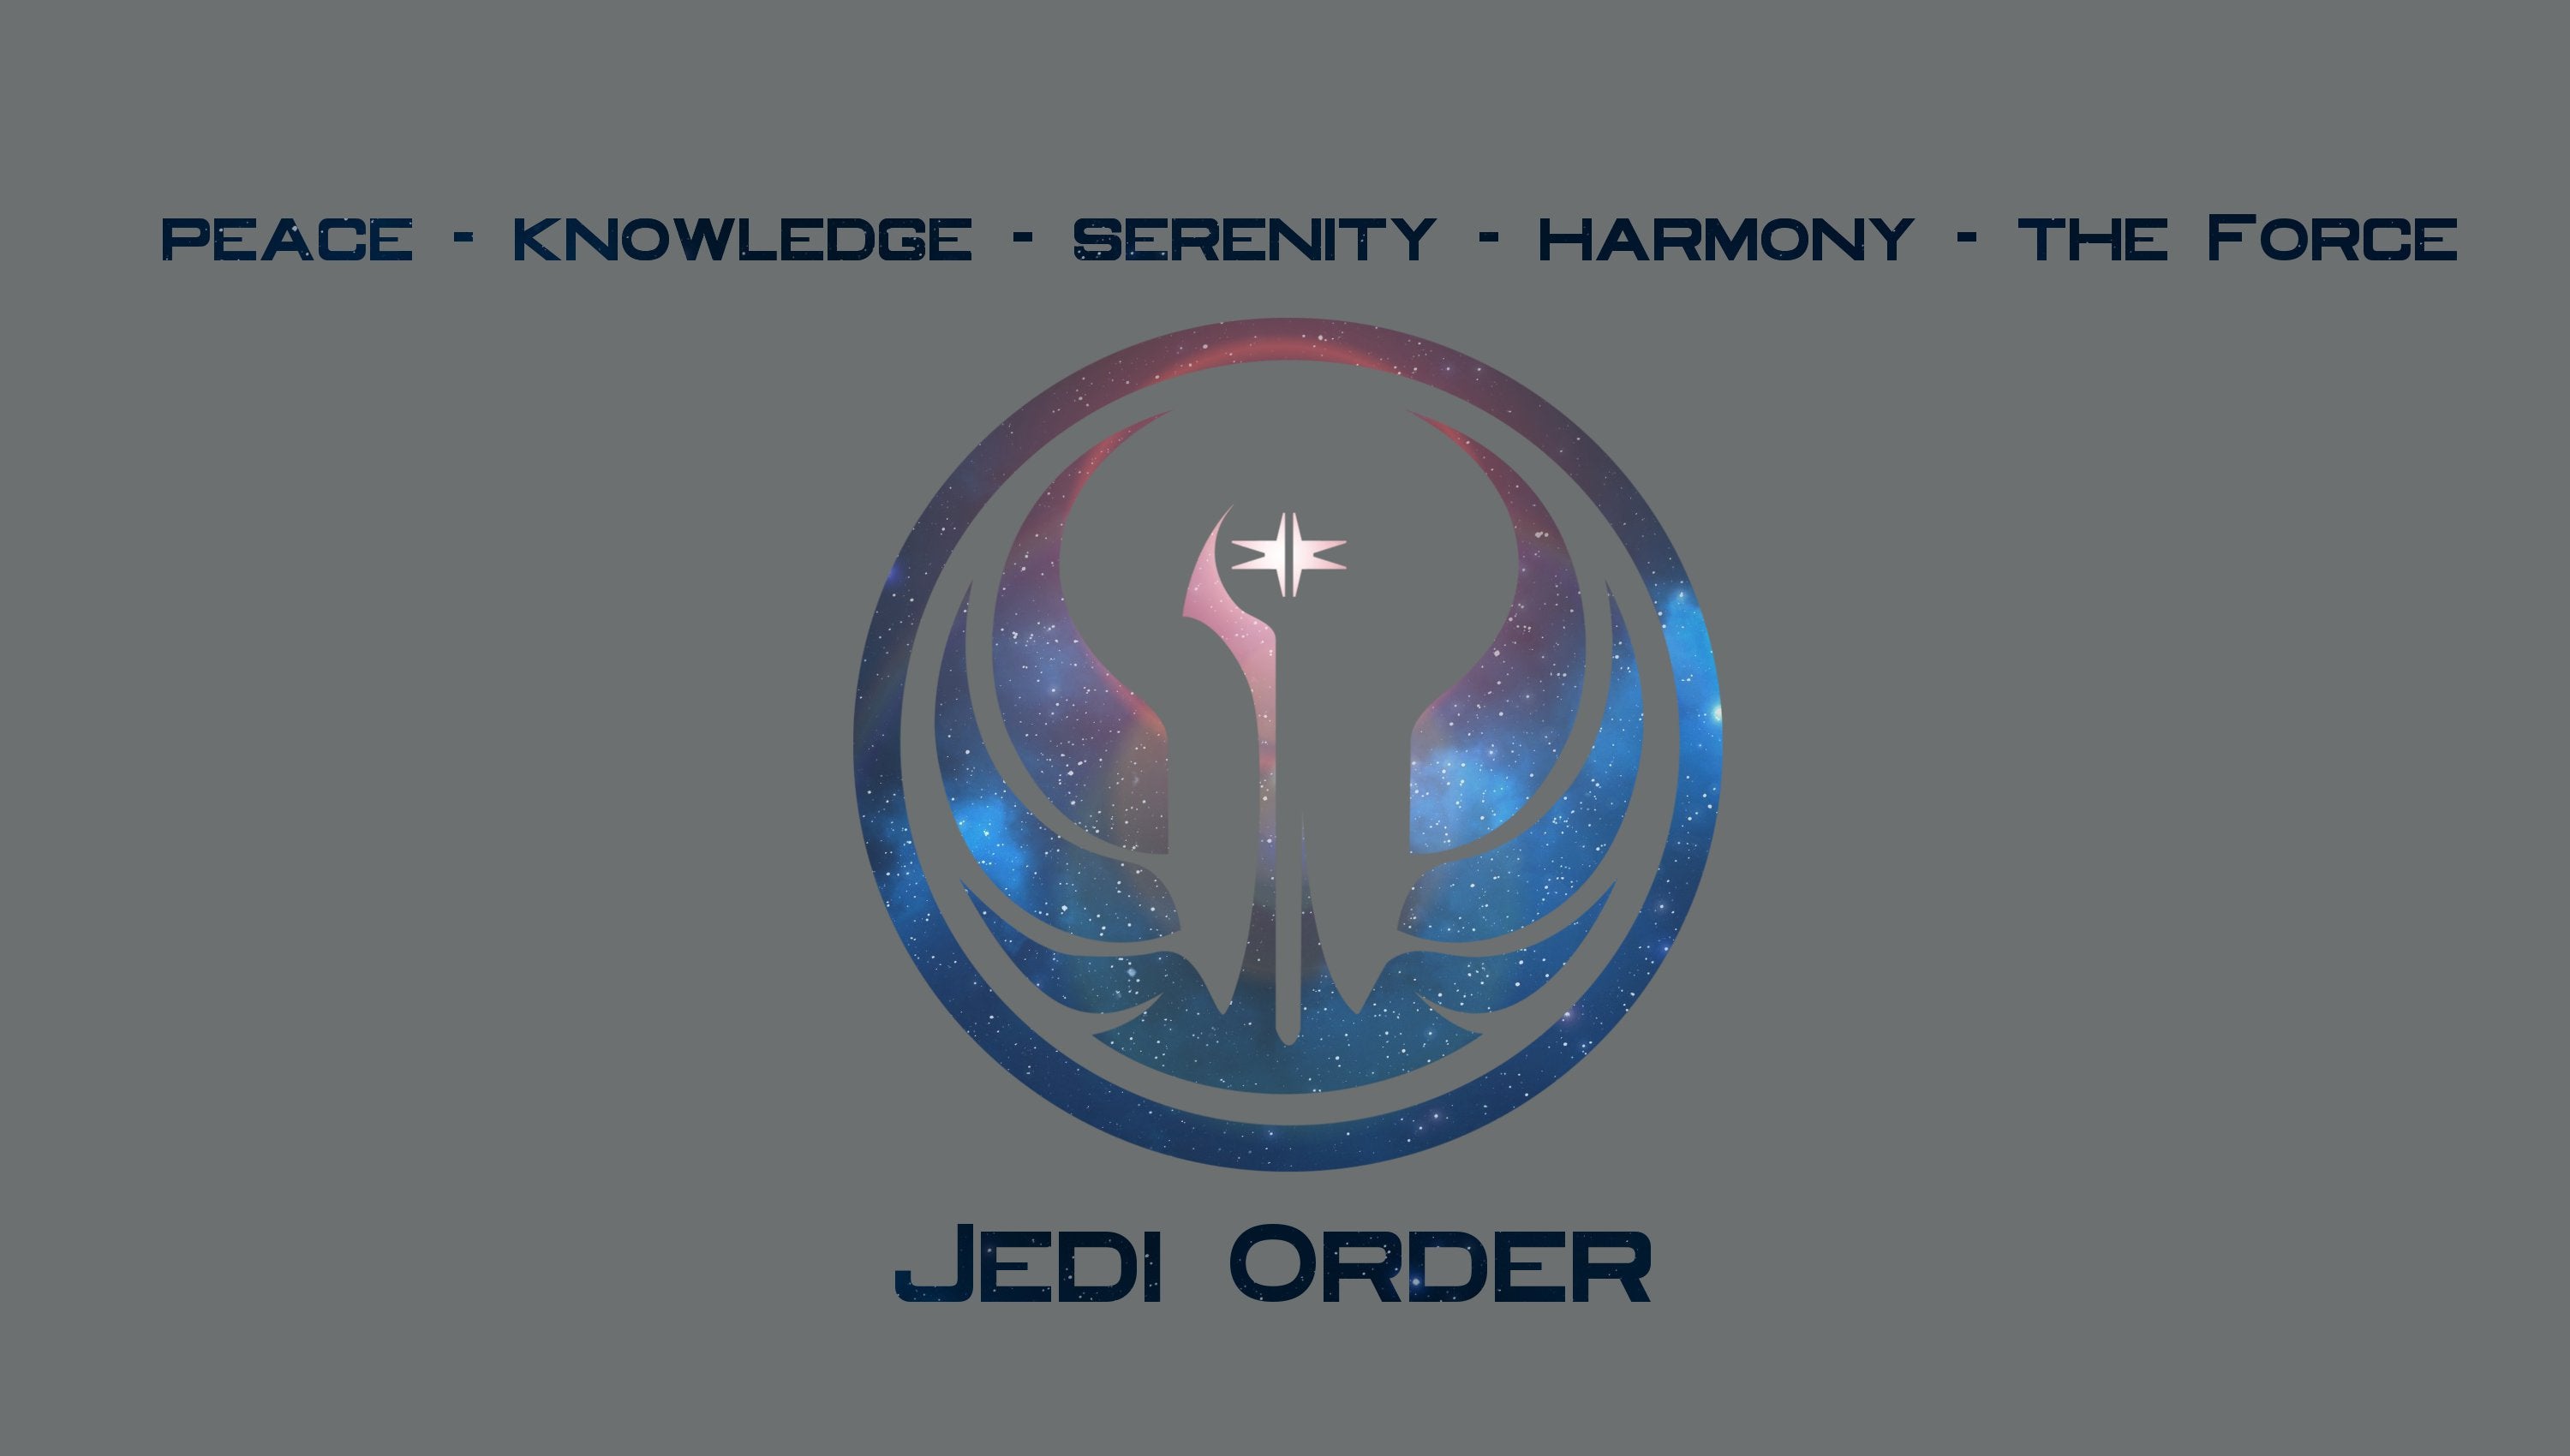 check out my Jedi code WallPapers! :D